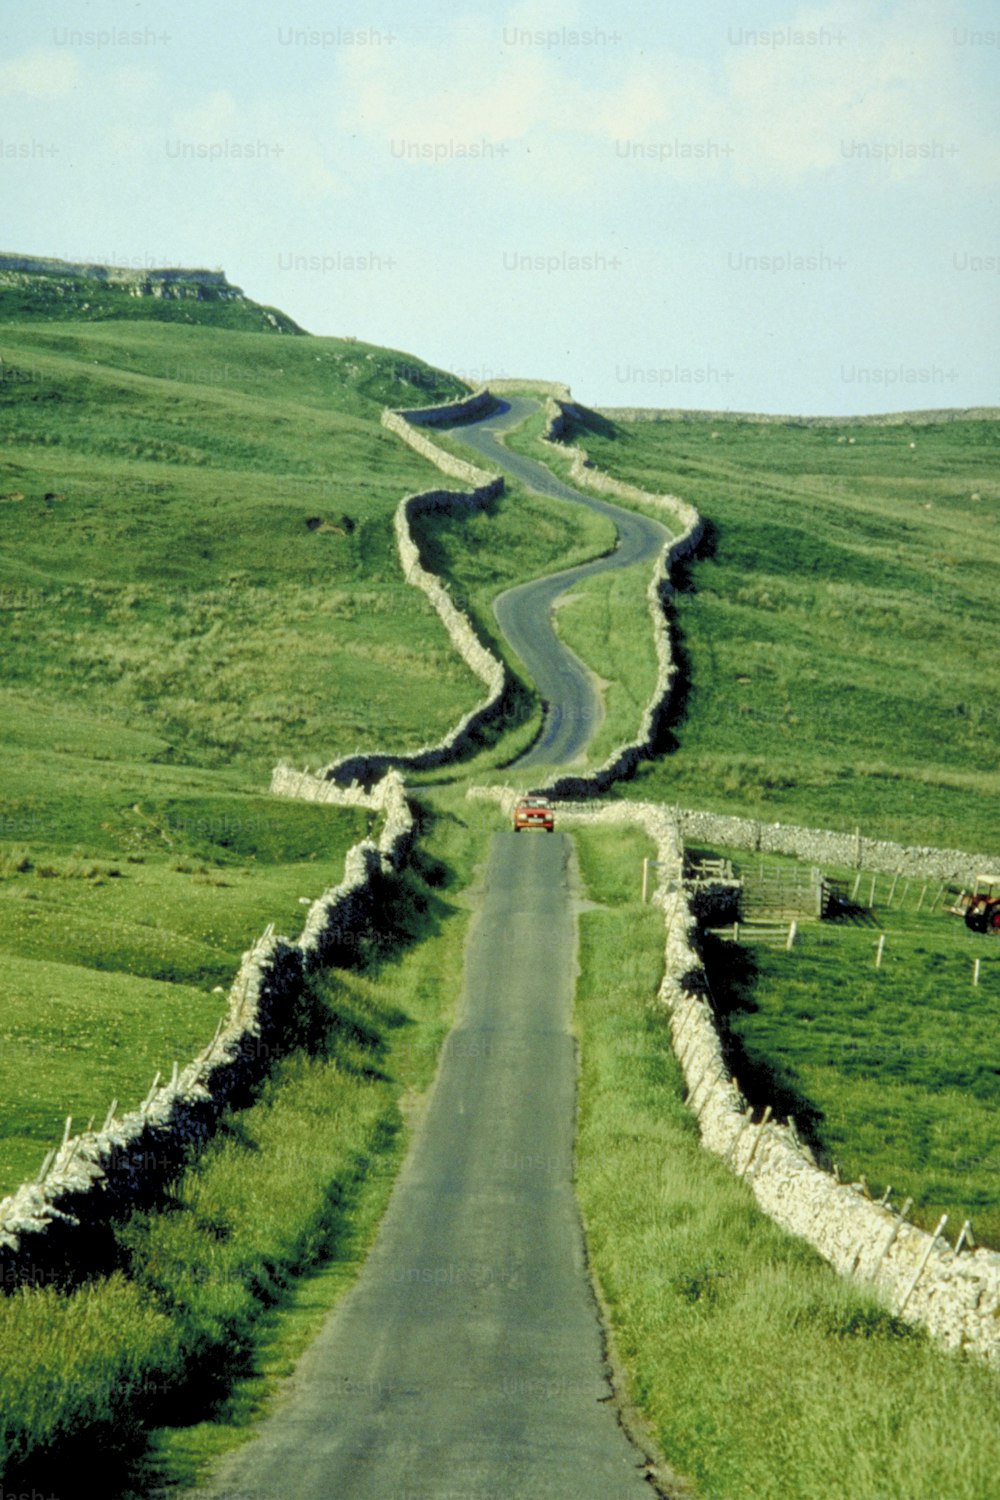 a winding road in the middle of a lush green field